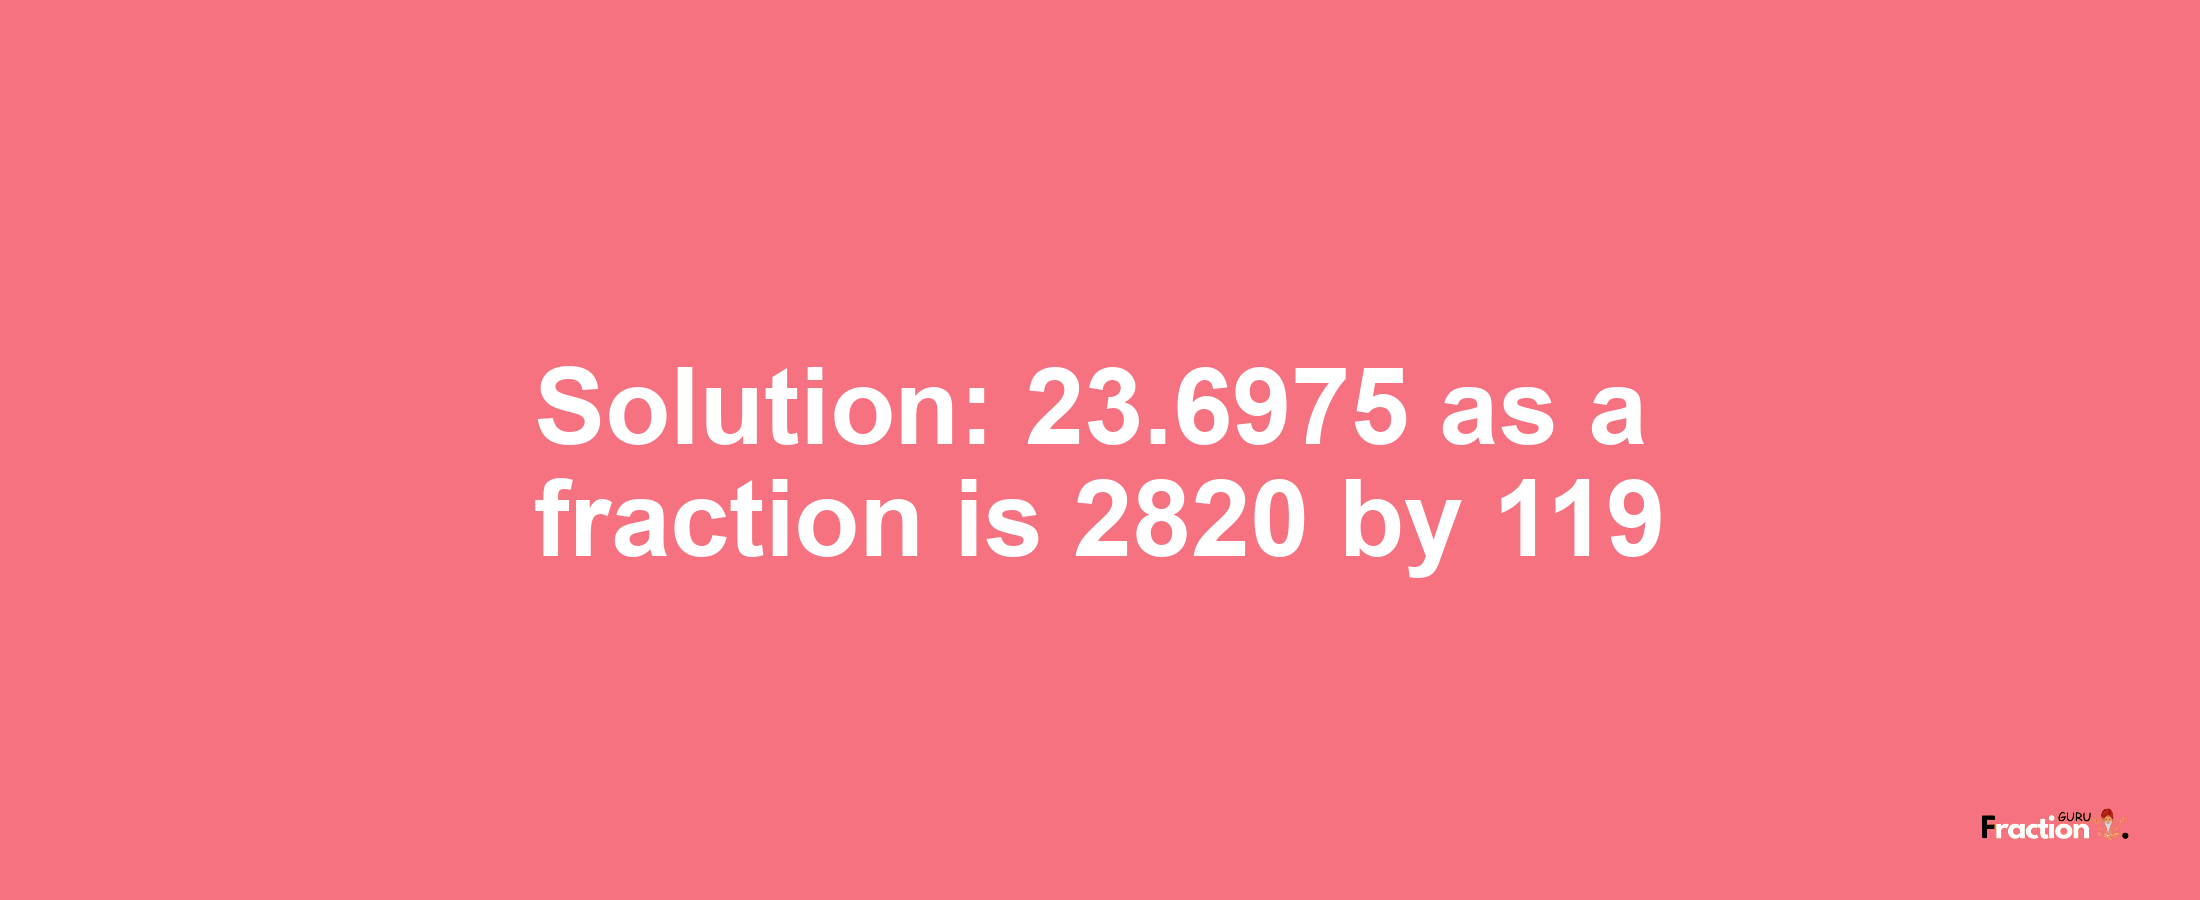 Solution:23.6975 as a fraction is 2820/119